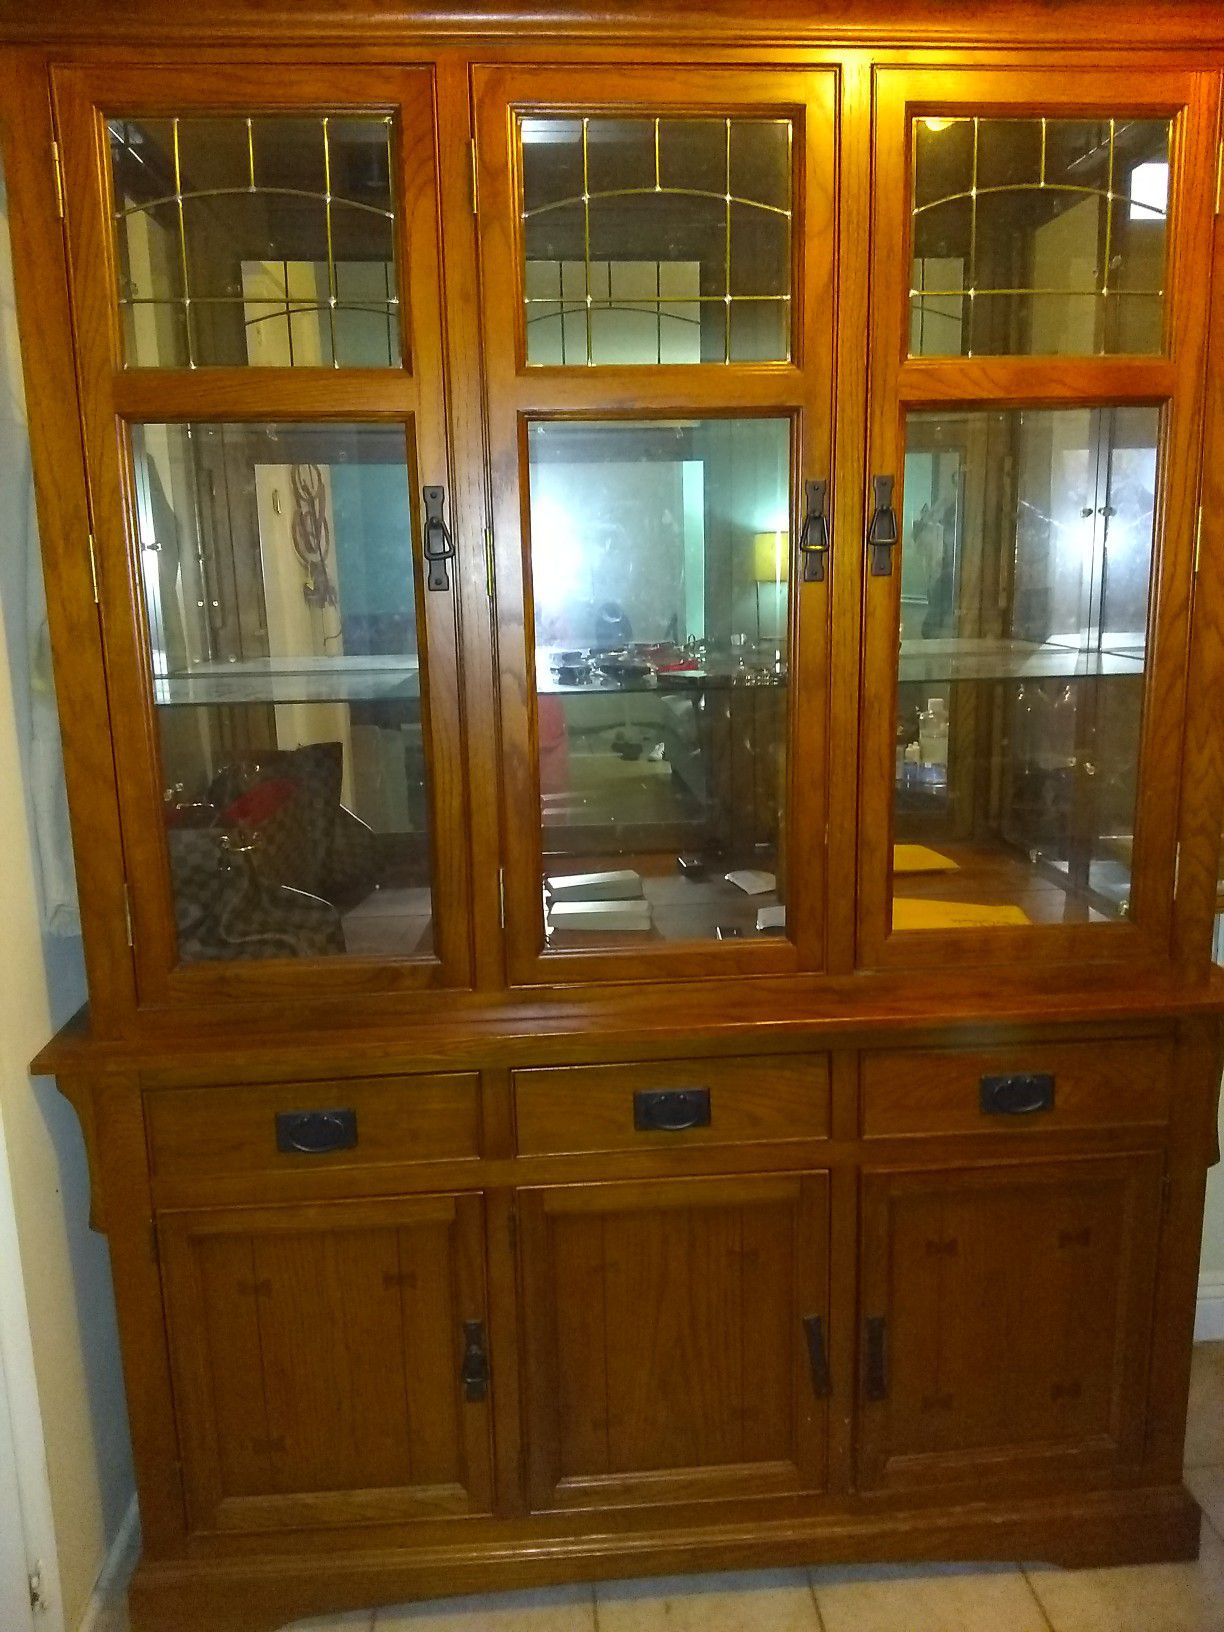 China Cabinet/Hutch, with glass shelves and lights. Lots of storage.